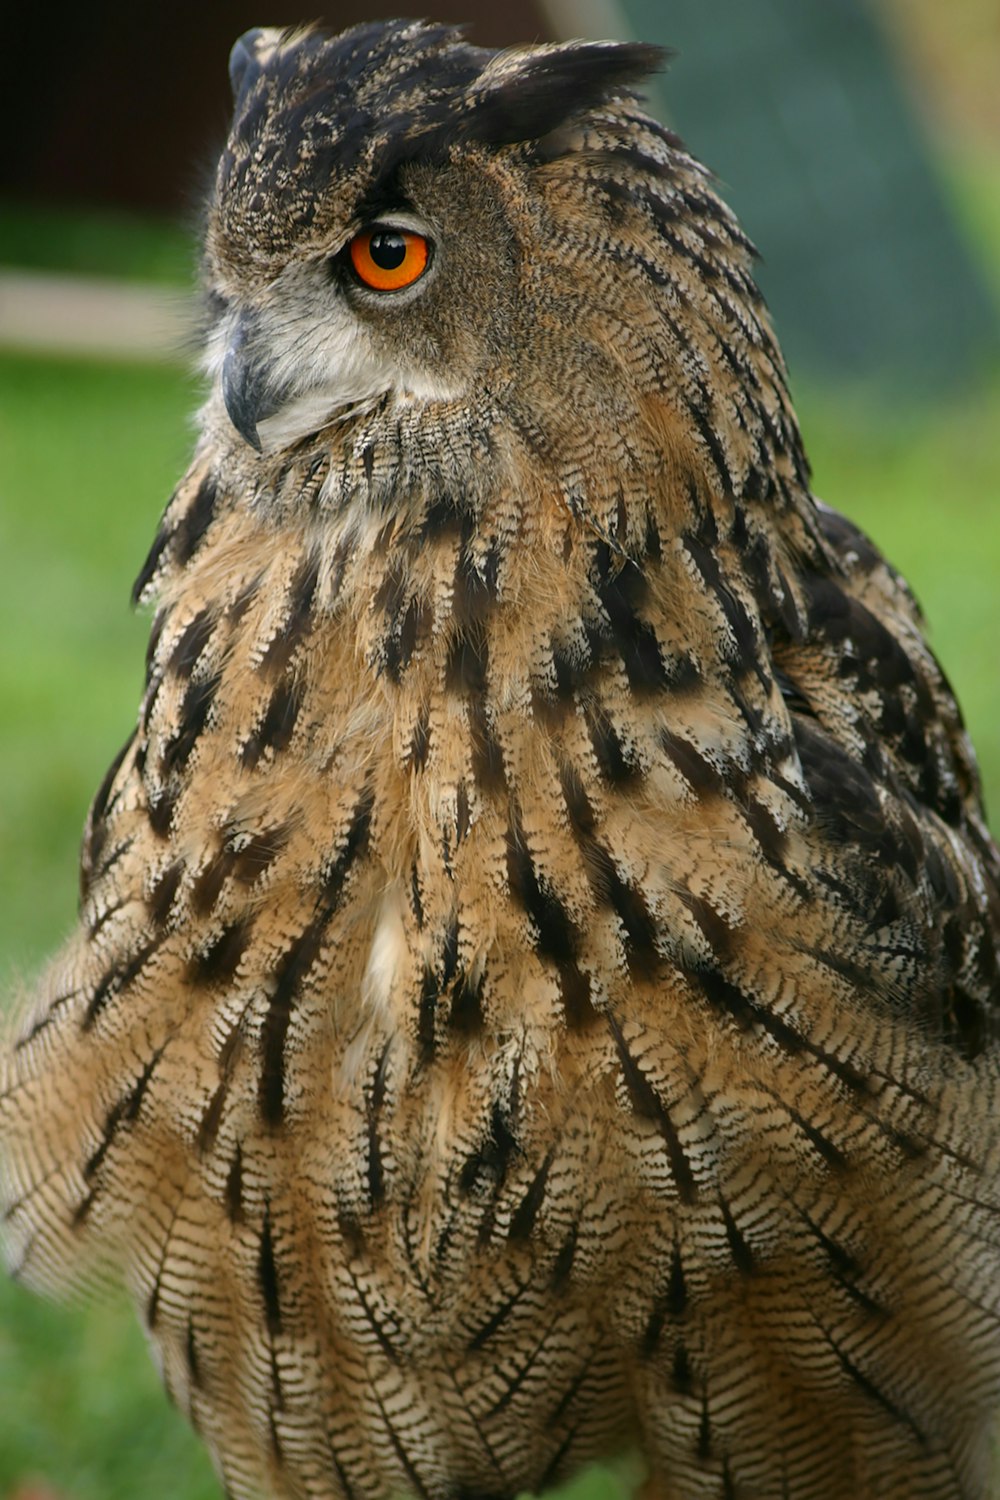 brown and gray owl in close up photography during daytime